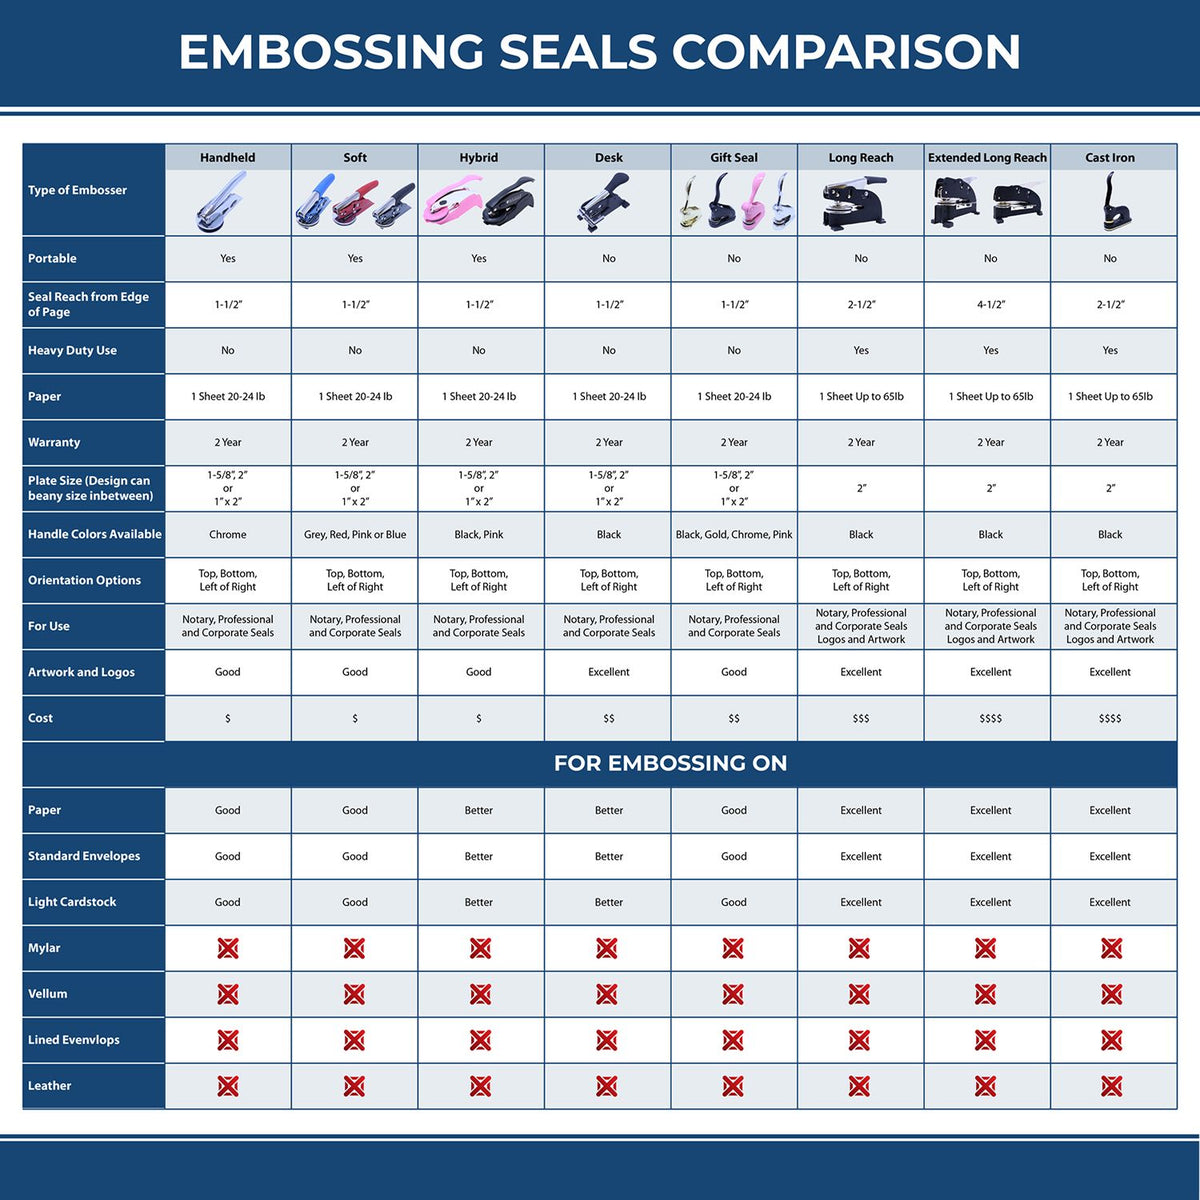 A comparison chart for the different types of mount models available for the Handheld South Dakota Architect Seal Embosser.